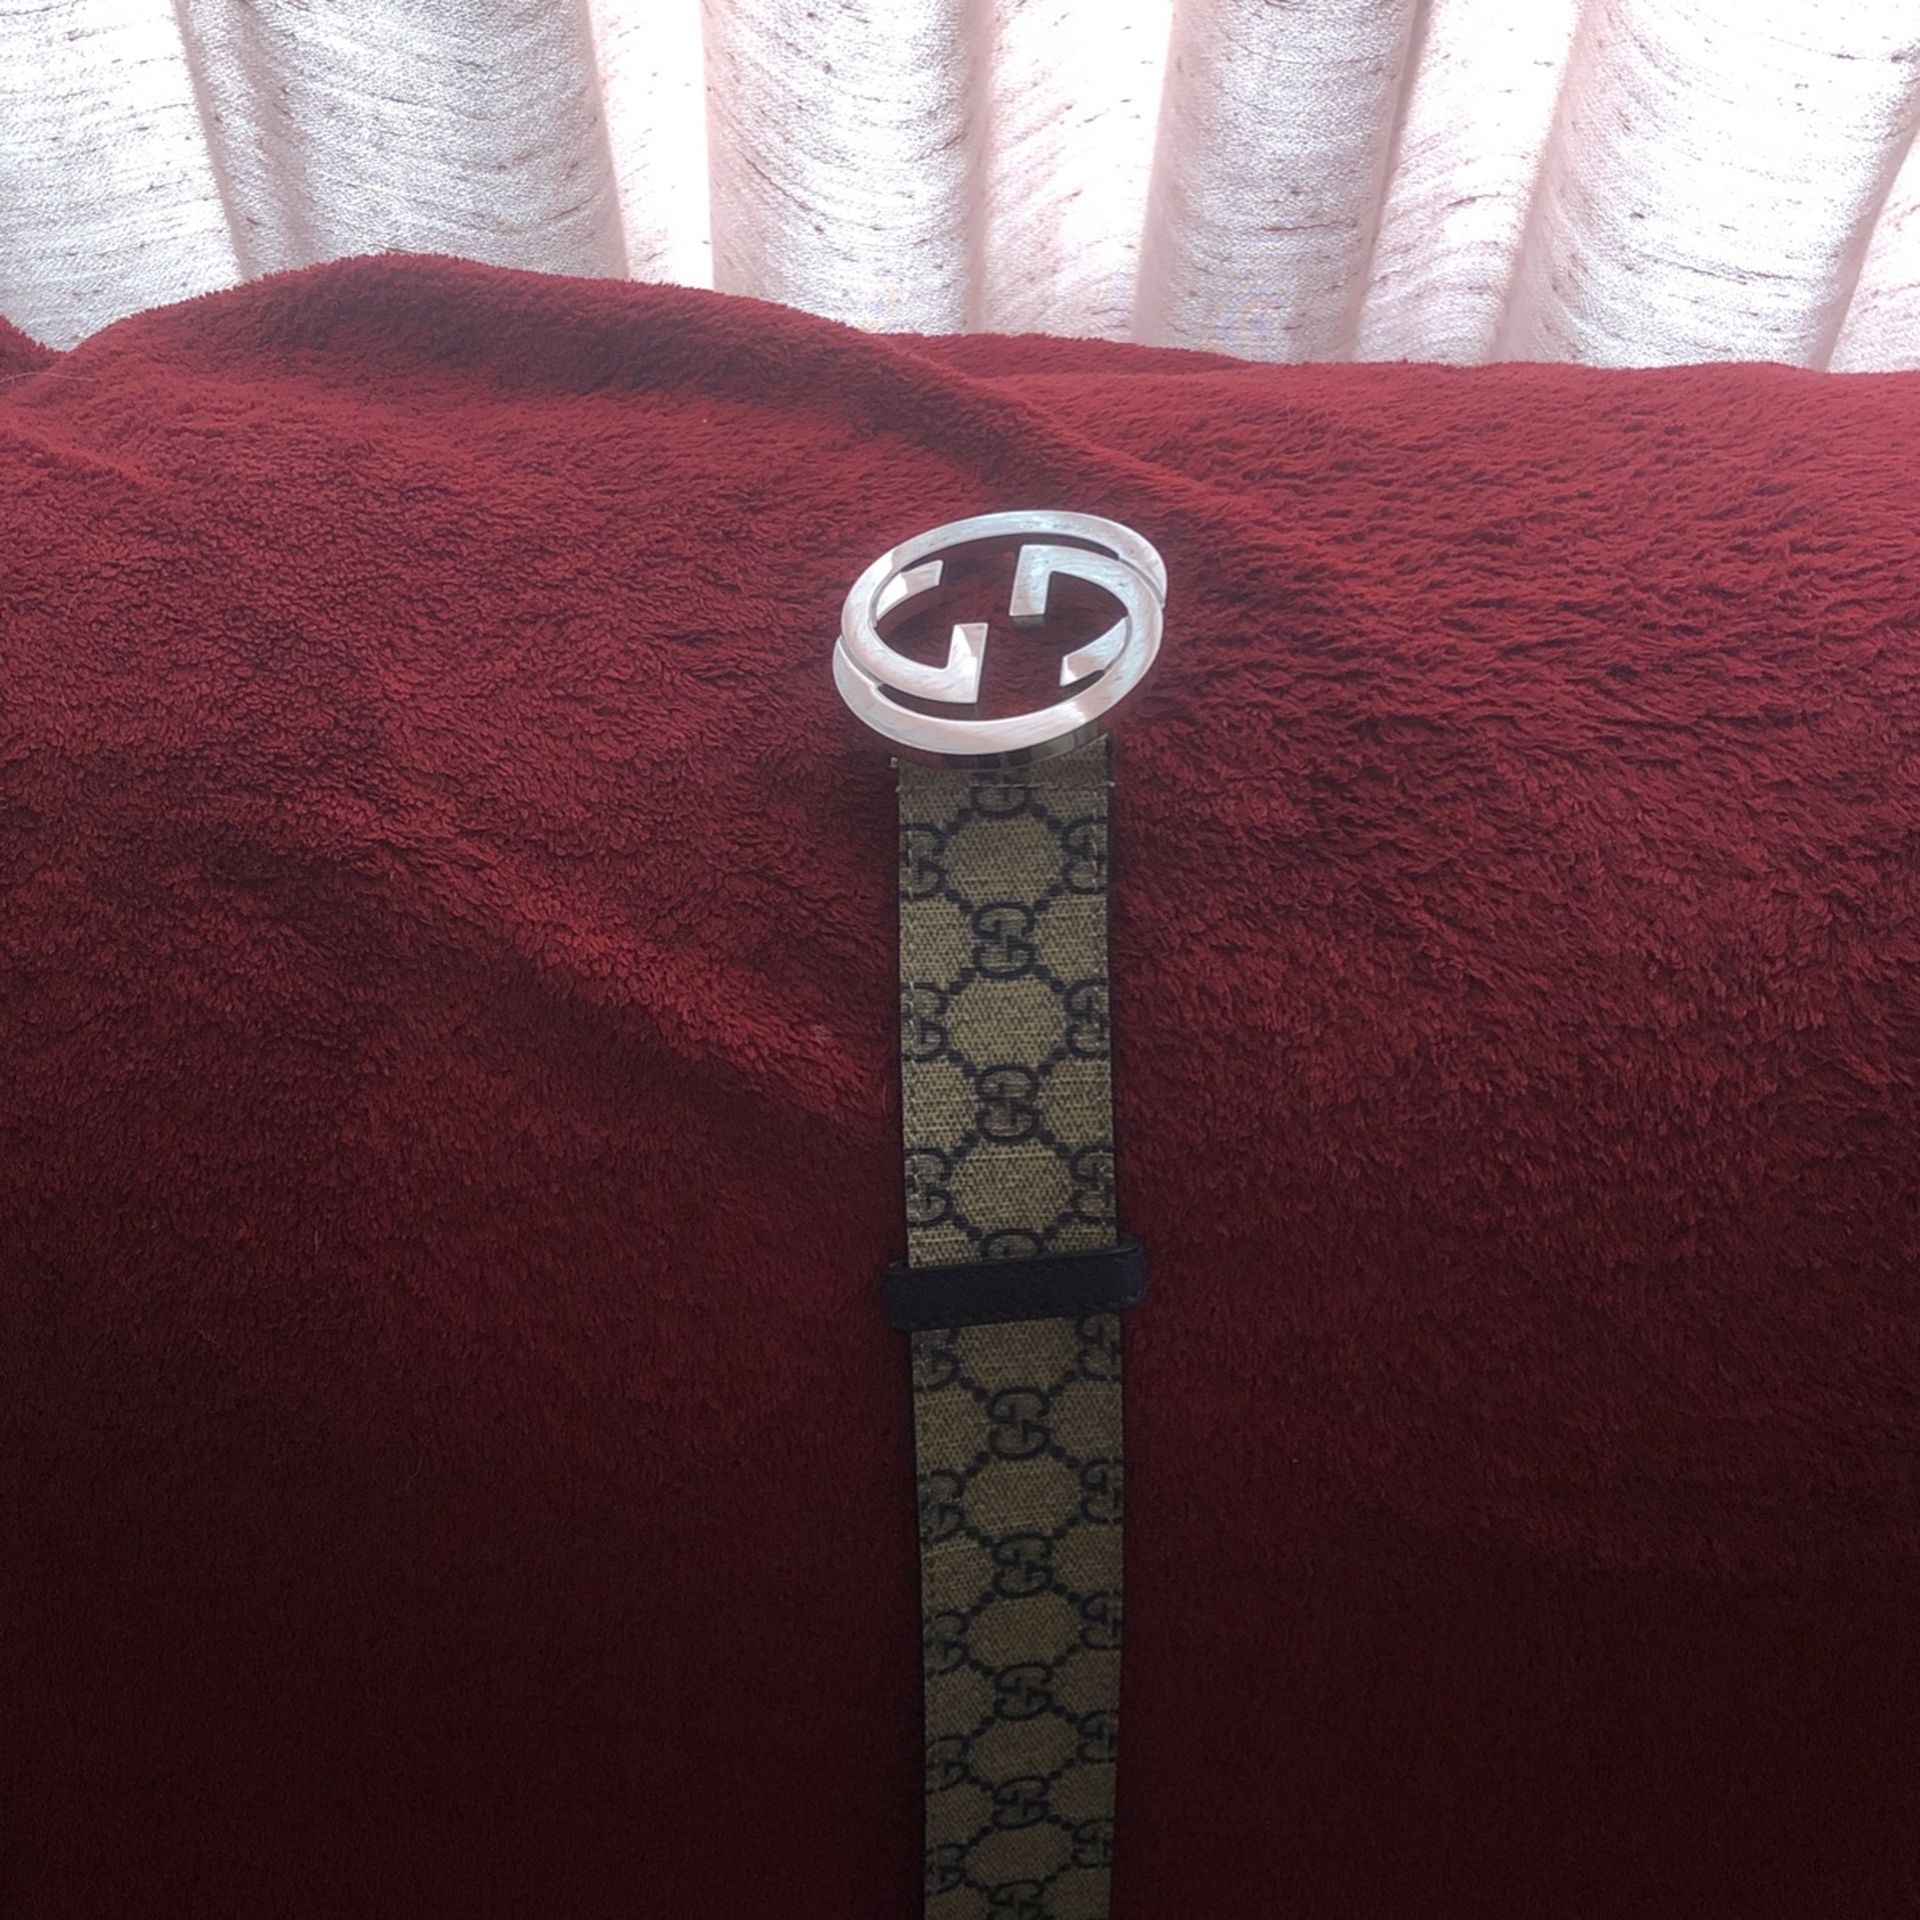 Gucci Supreme Belt Worn And Too Small On Me Selling For 300 Or Trade For A Bigger Belt 